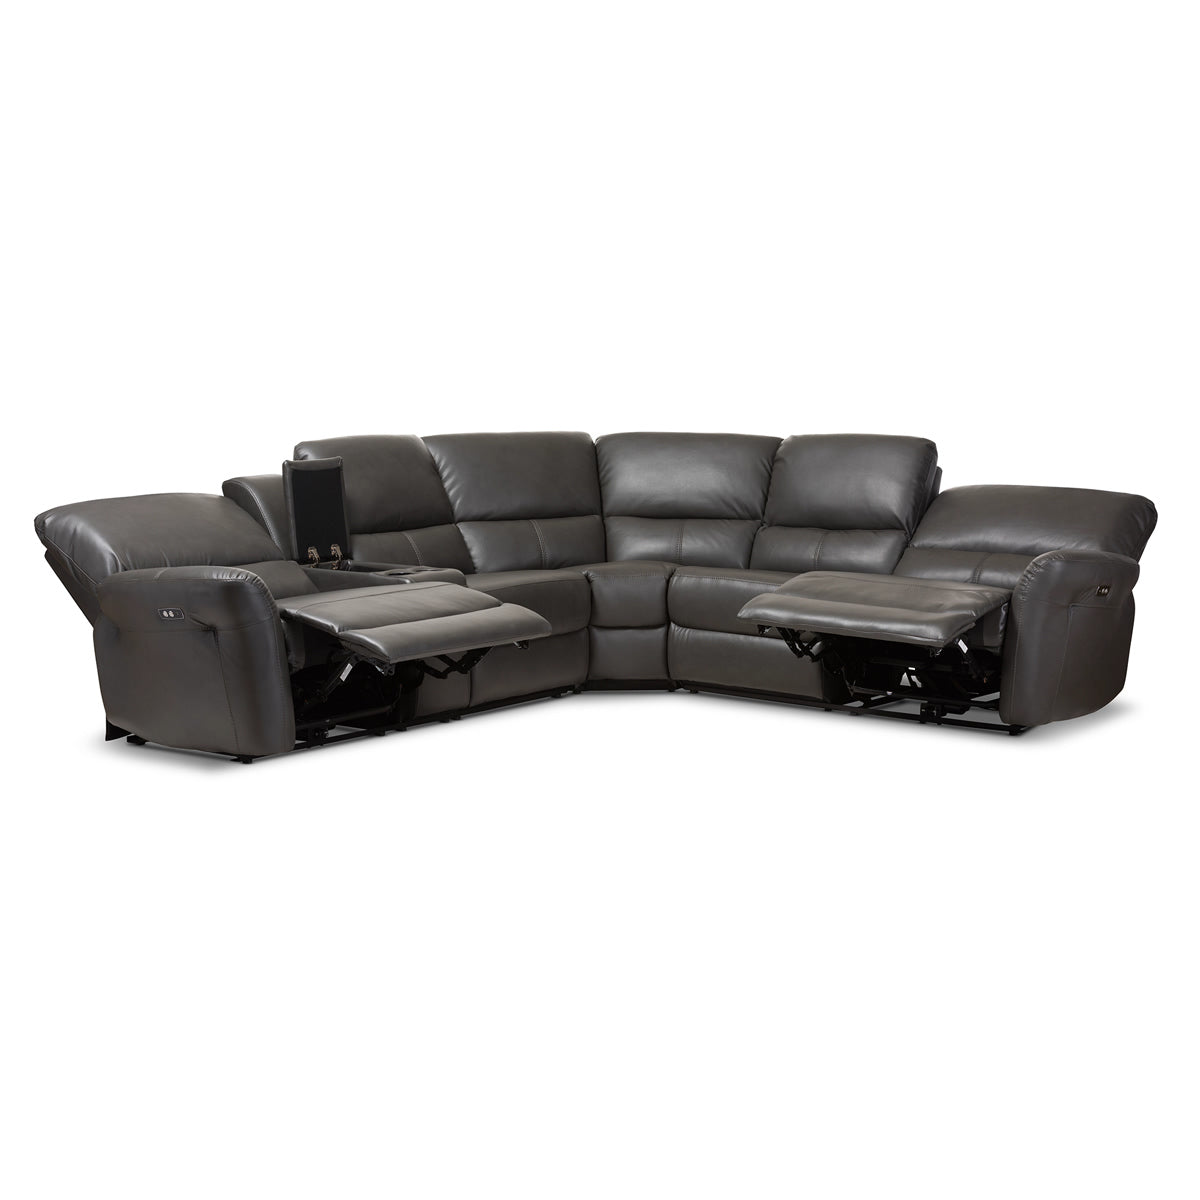 Baxton Studio Amaris Modern and Contemporary Grey Bonded Leather 5-Piece Power Reclining Sectional Sofa with USB Ports Baxton Studio-sofas-Minimal And Modern - 6